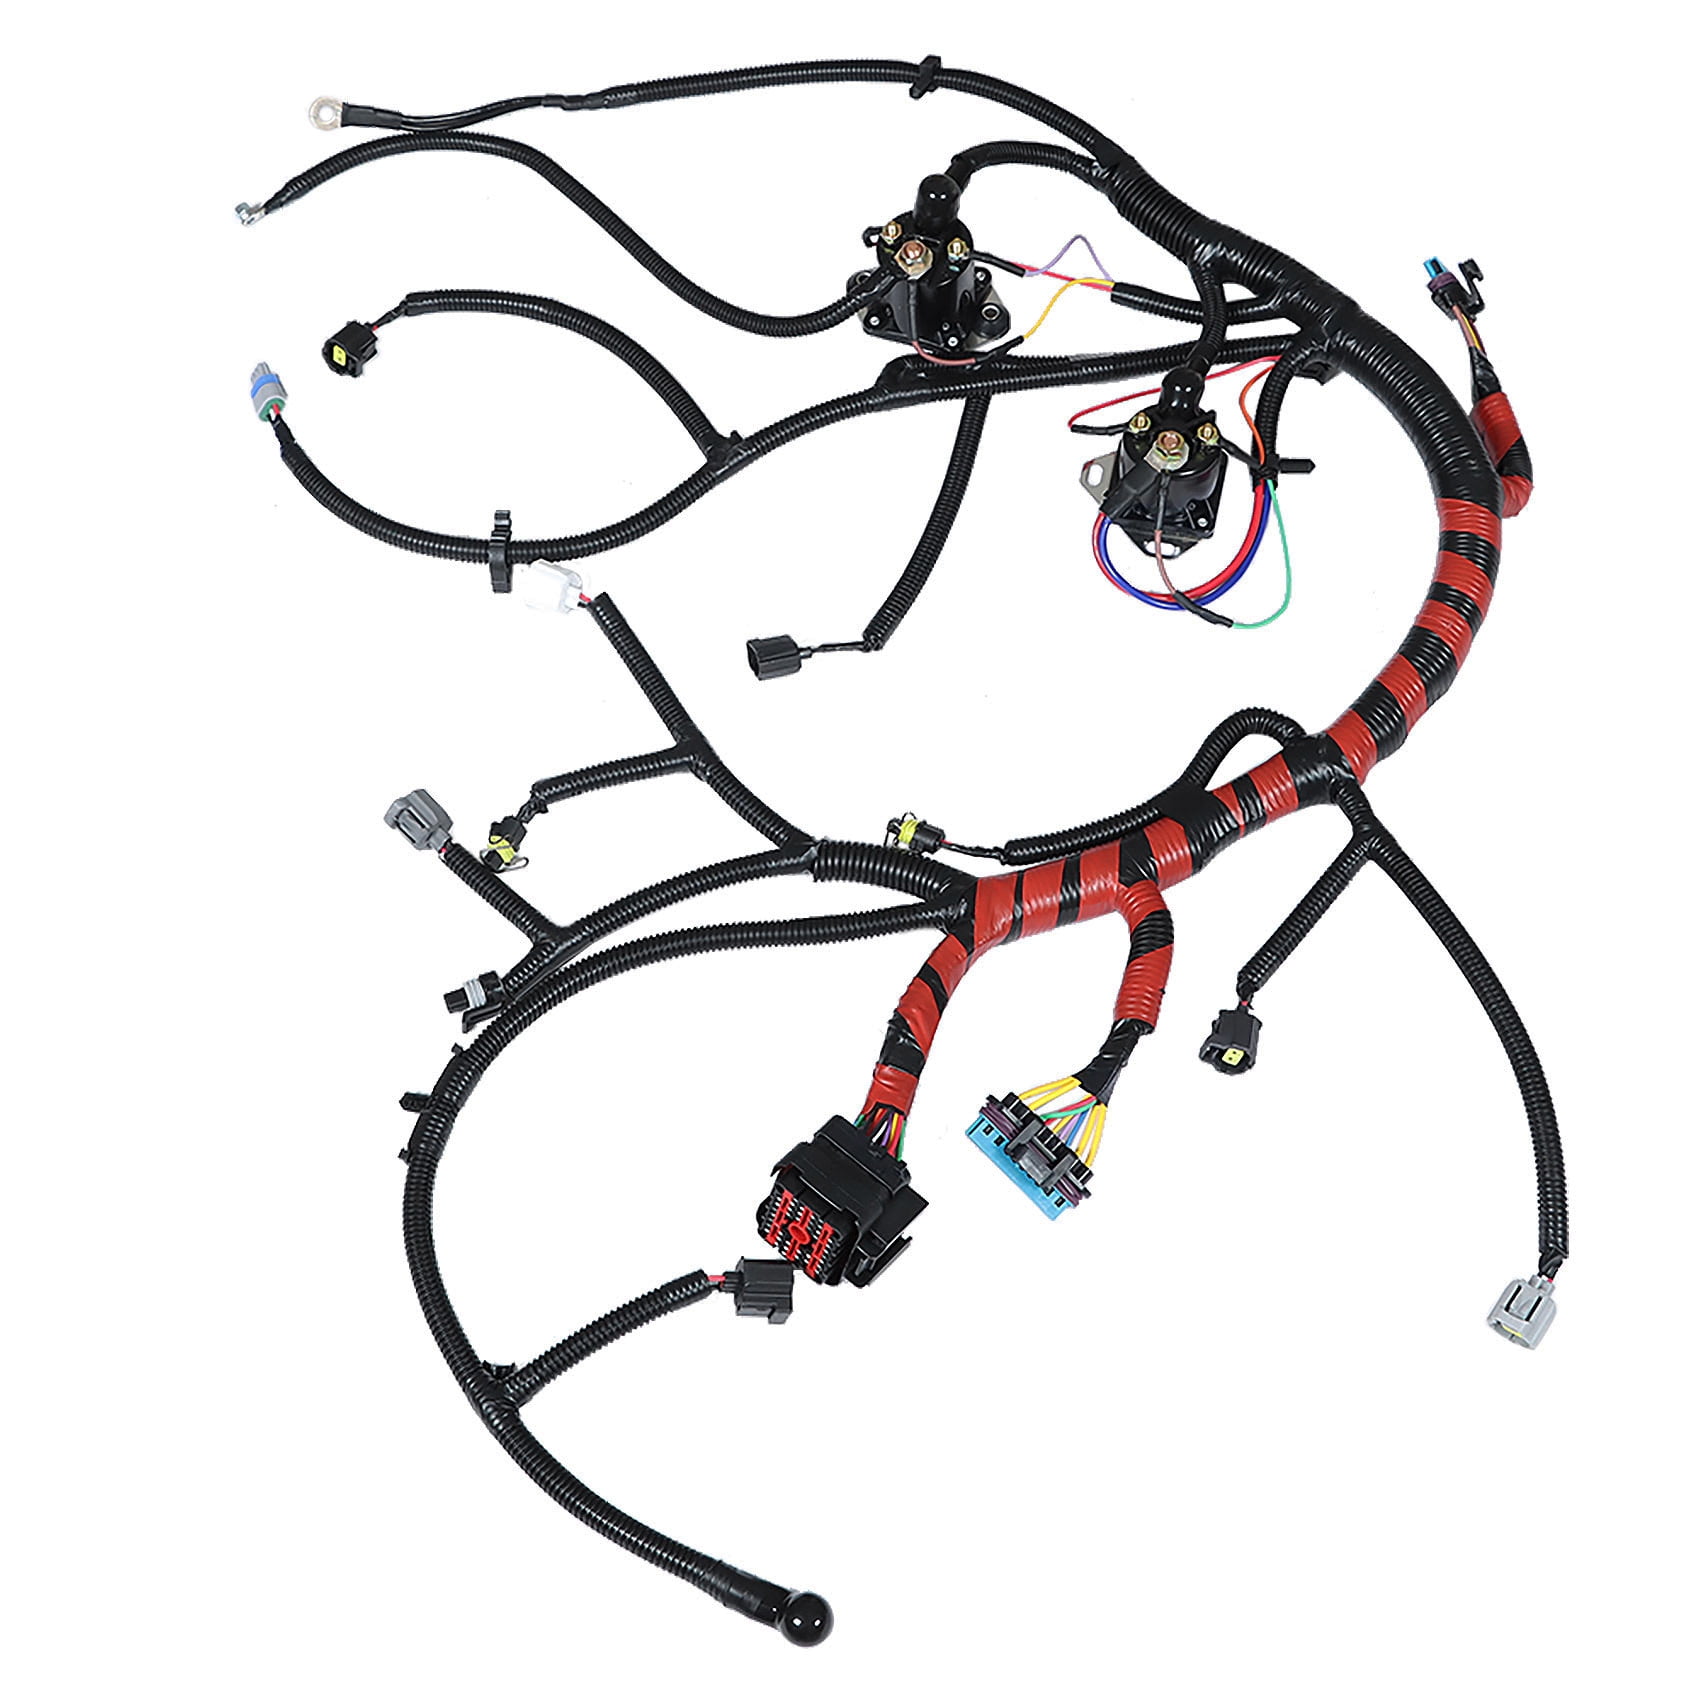 LABLT Diesel Engine Wiring Harness Replacement for Ford Excursion F250 F350  F450 7.3L